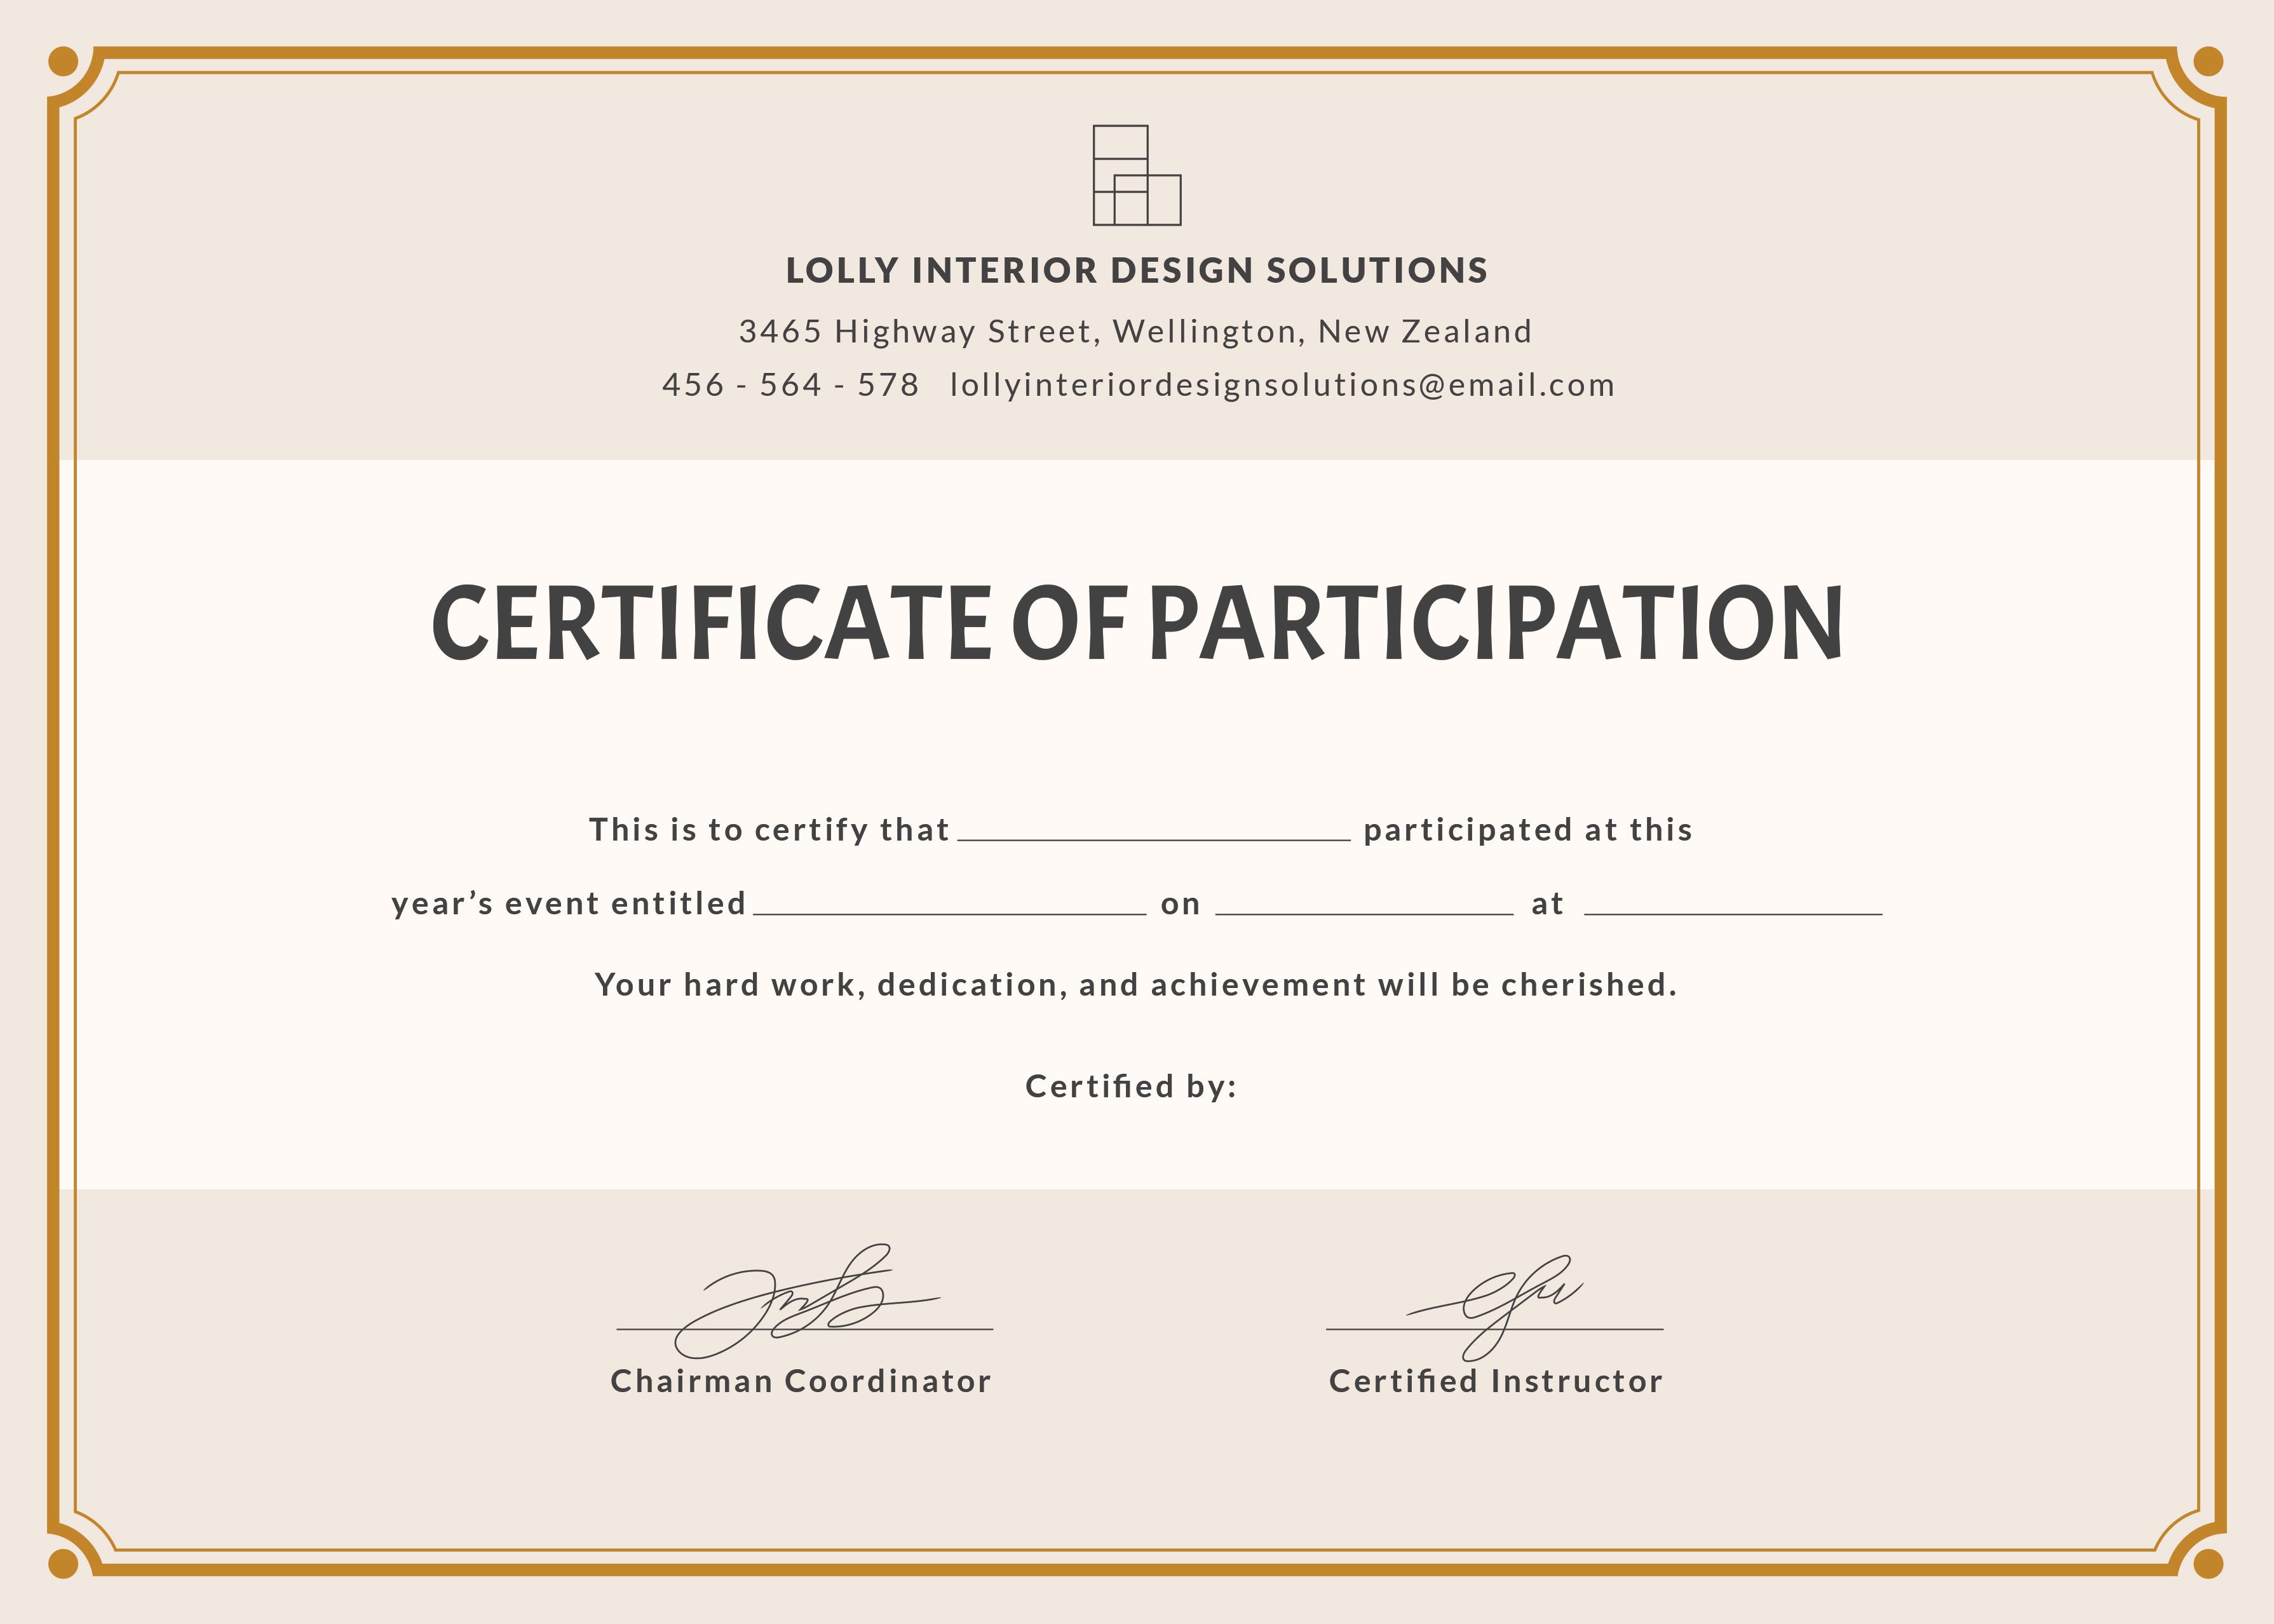 Certificate of Participation Template 